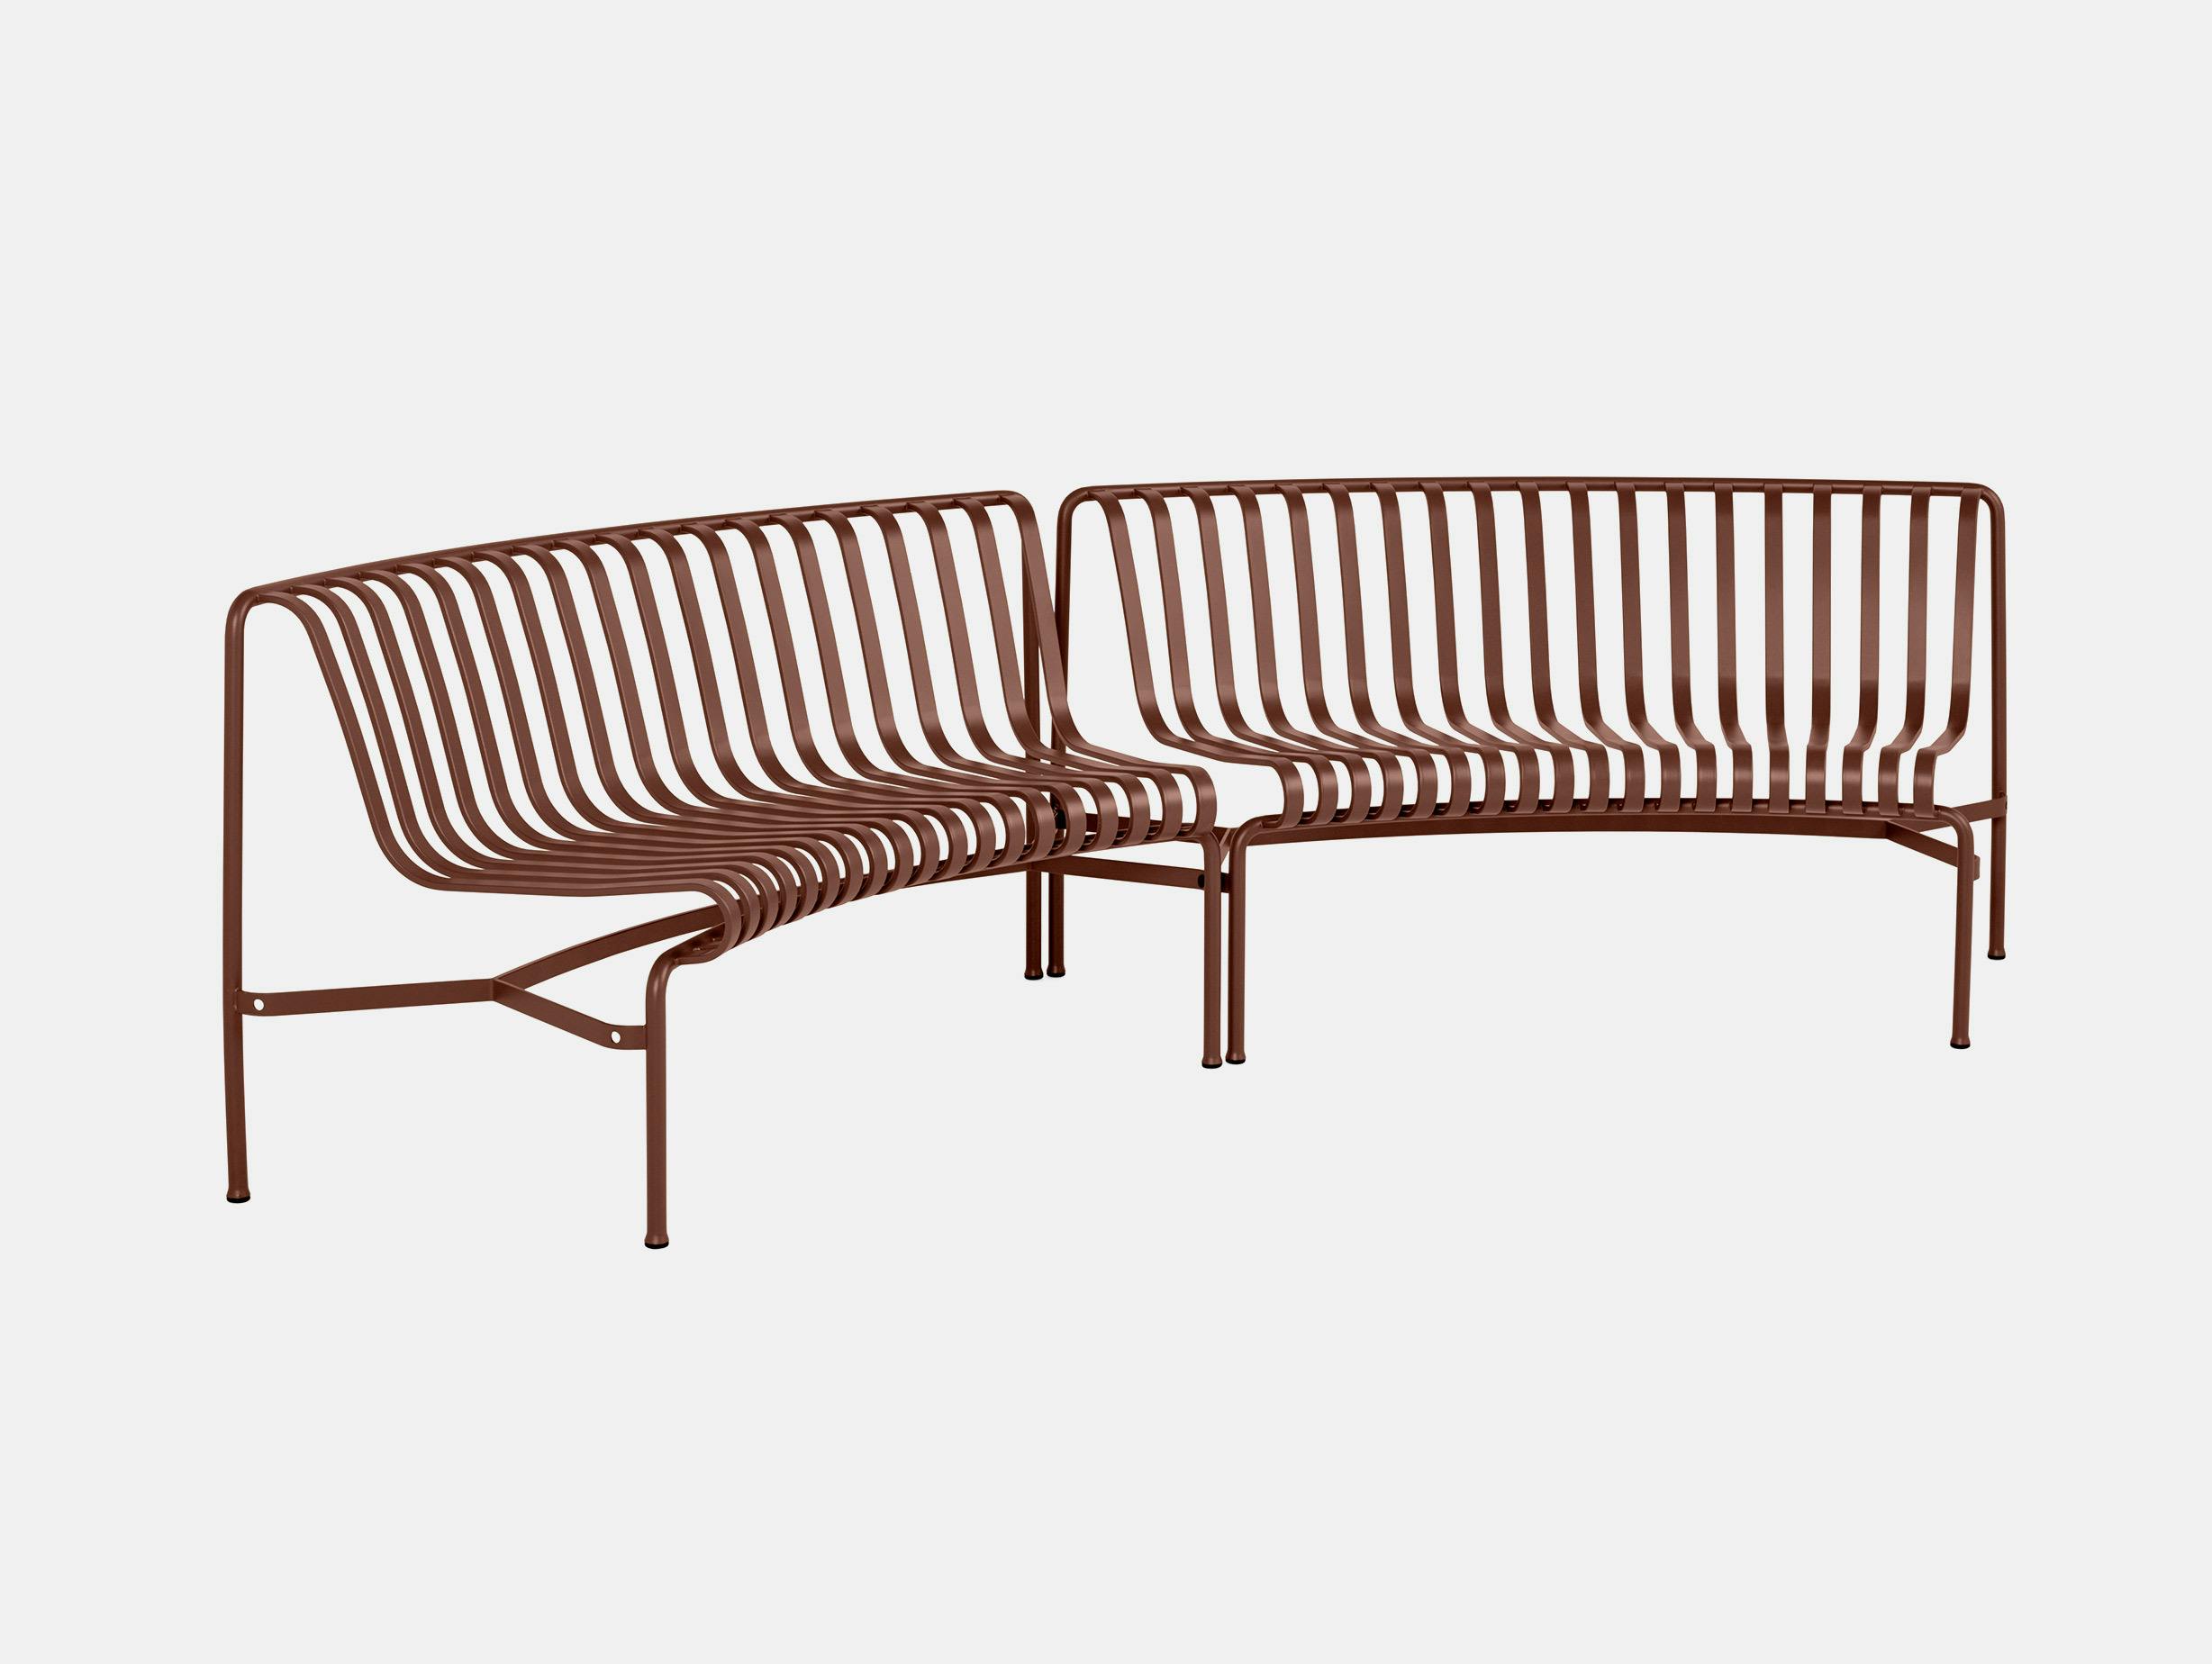 Hay ronan erwan bouroullec palissade park dining bench in in iron red